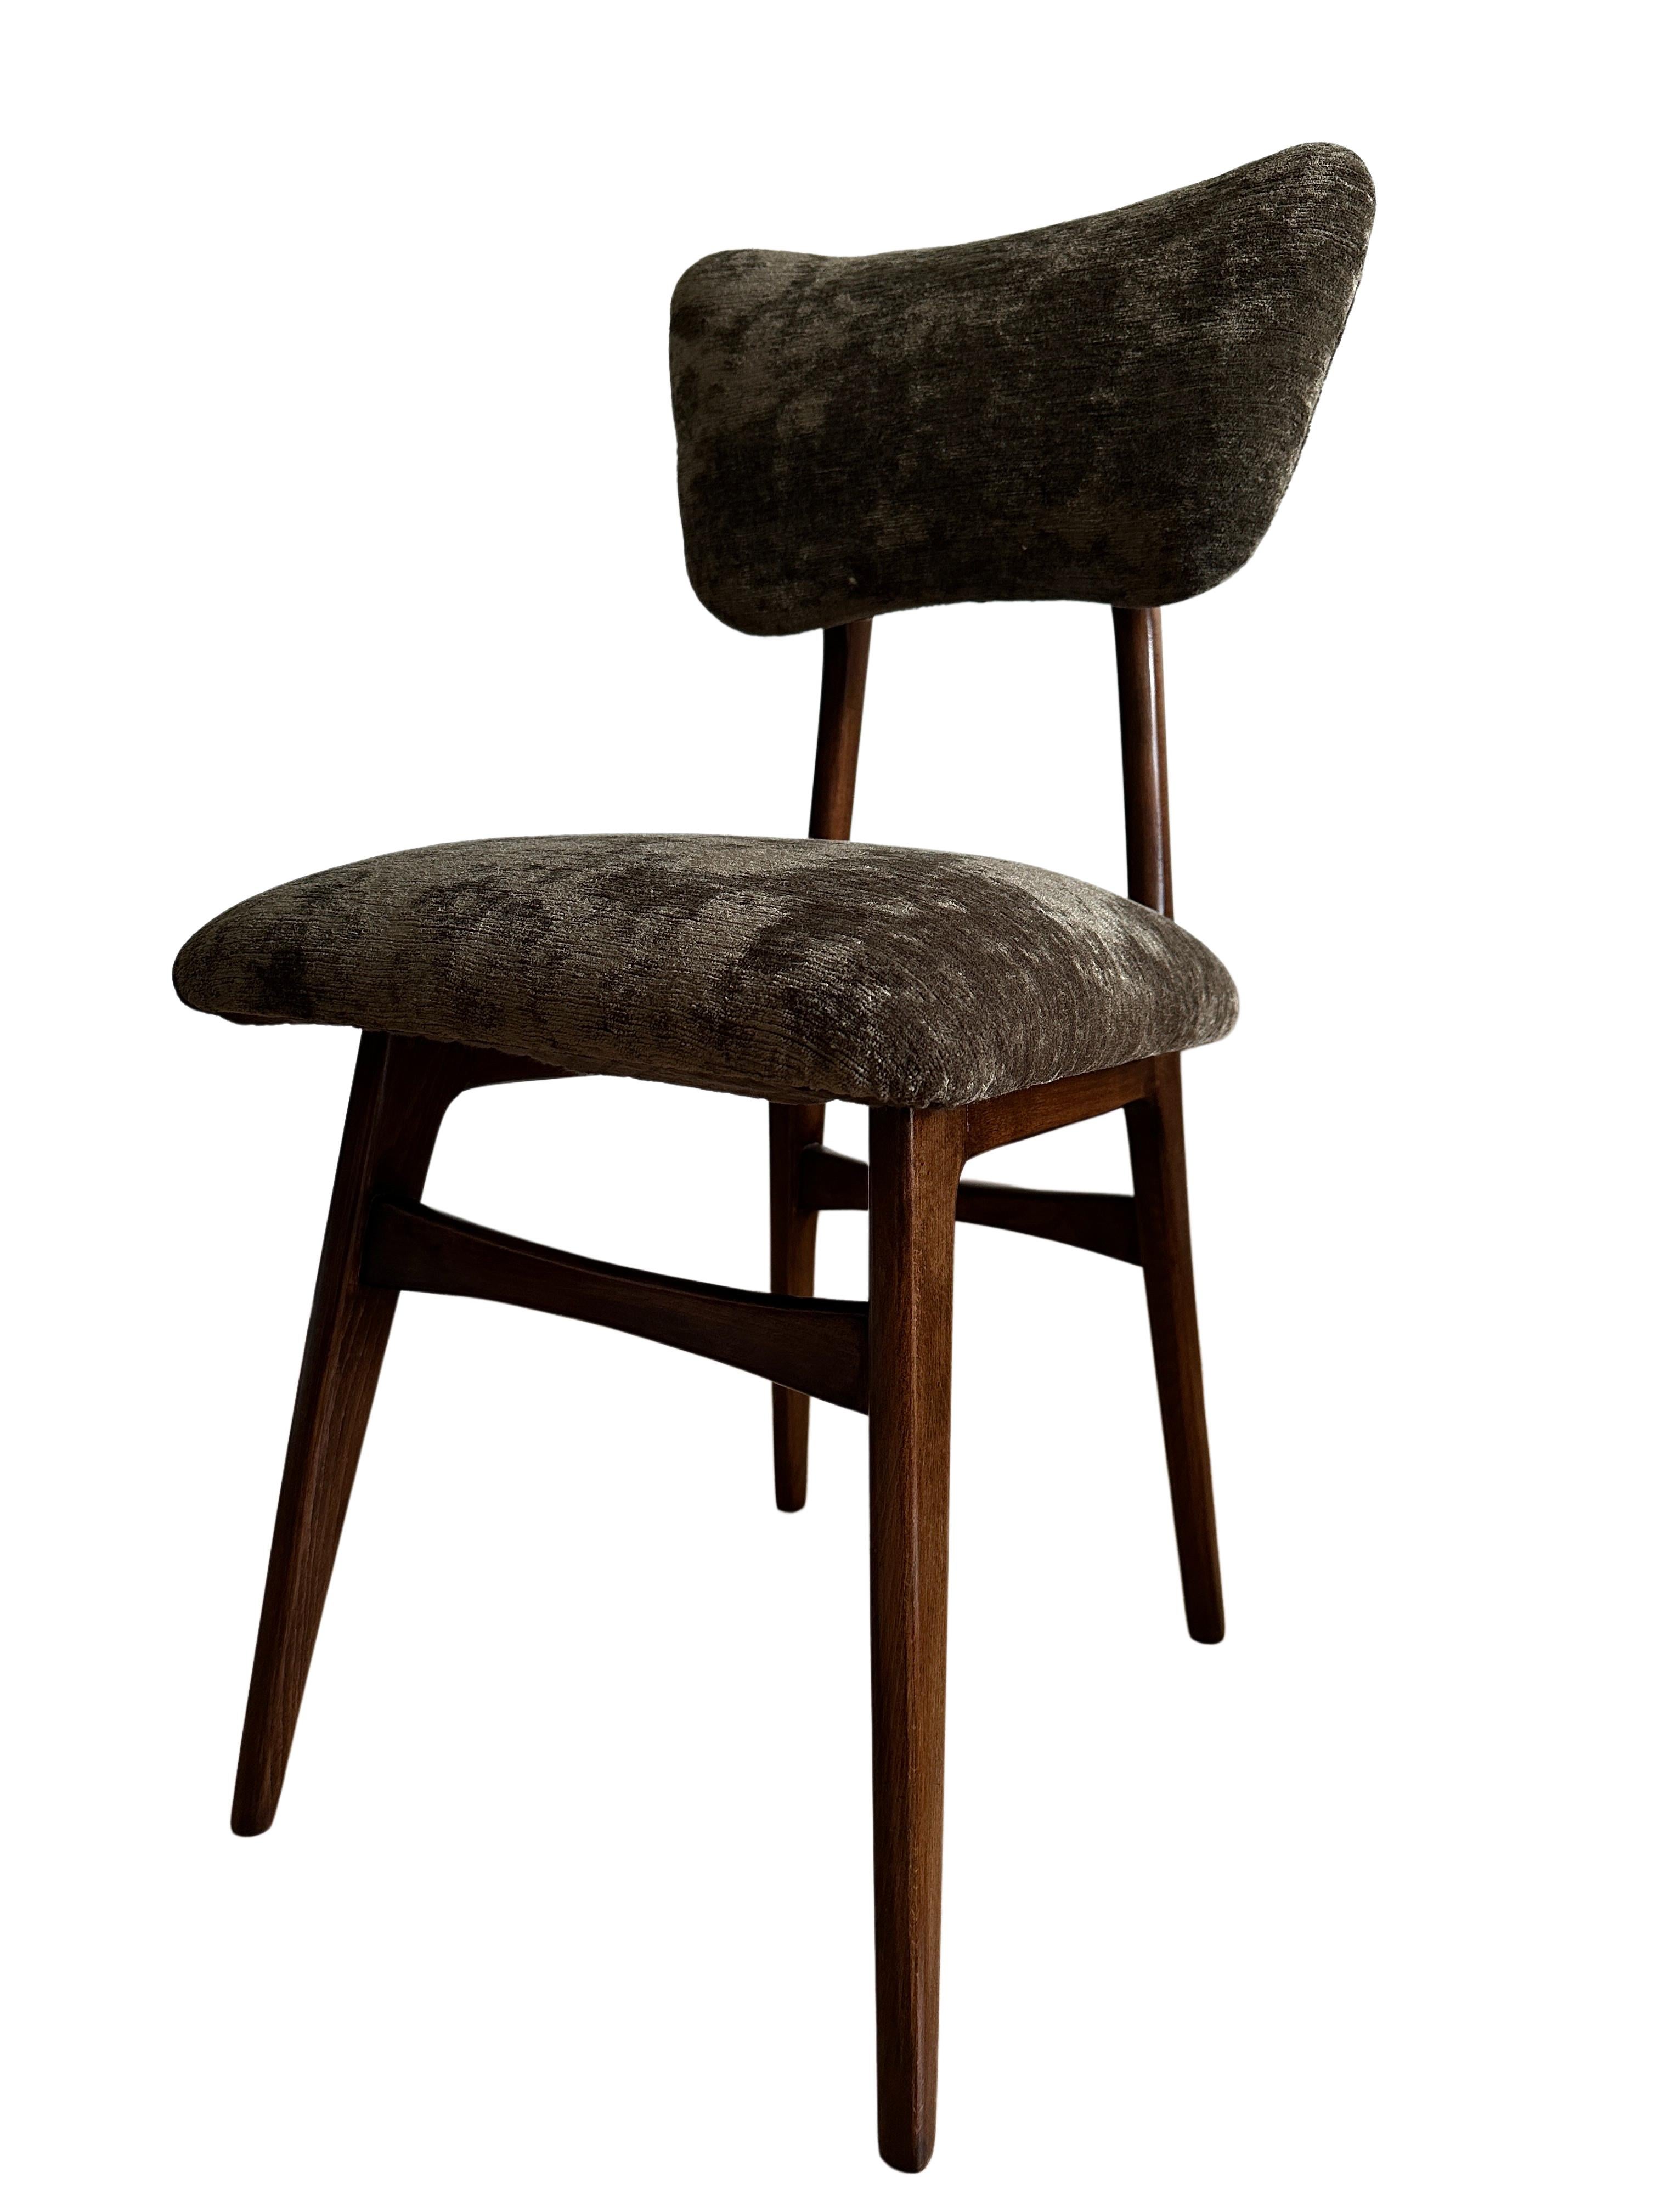 20th Century Set of Four Midcentury Dining Chairs in Green Velvet Upholstery, Poland, 1960s For Sale